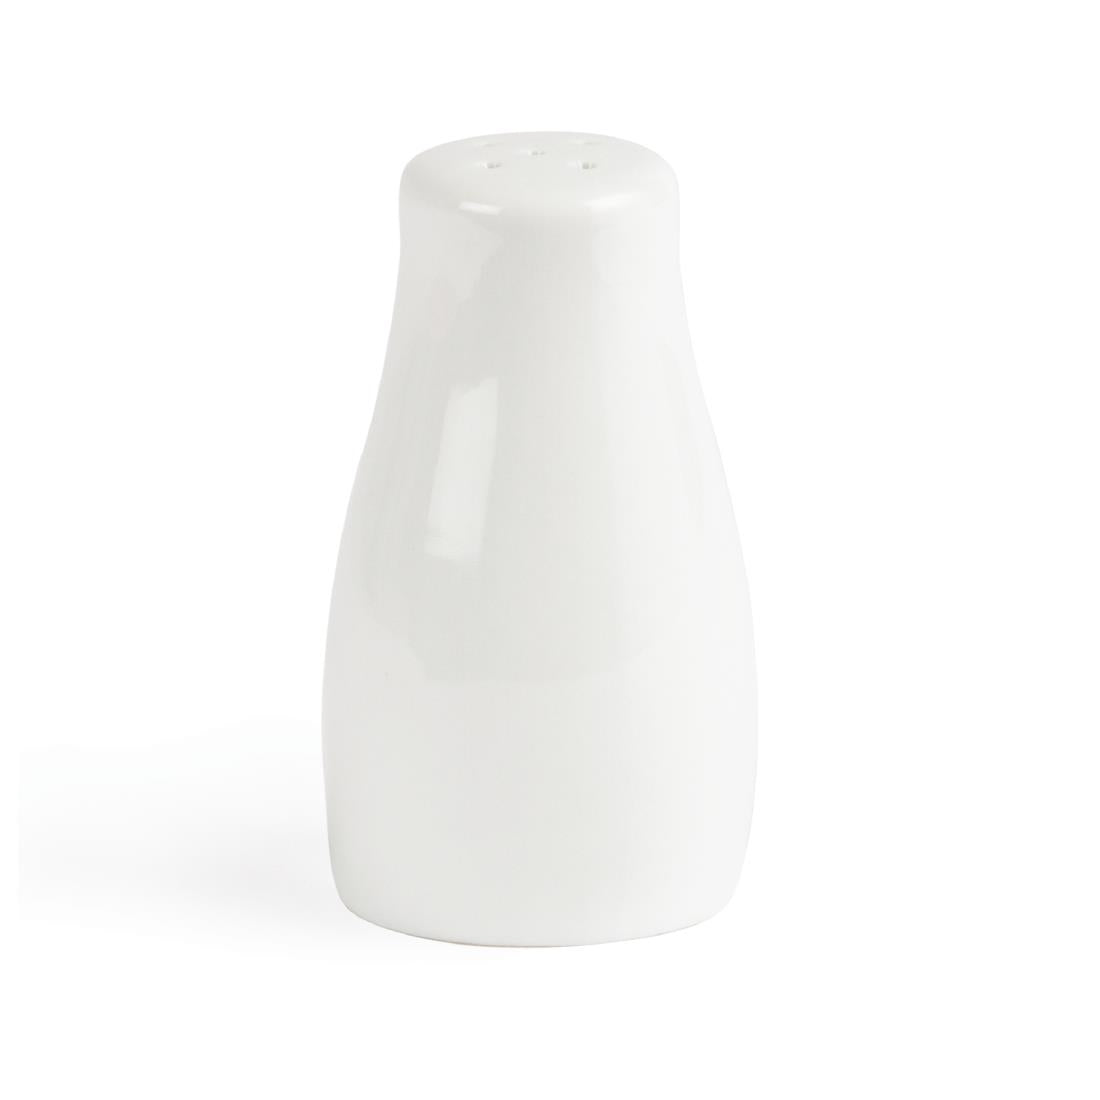 C214 Olympia Whiteware Pepper Shakers 90mm (Pack of 12)